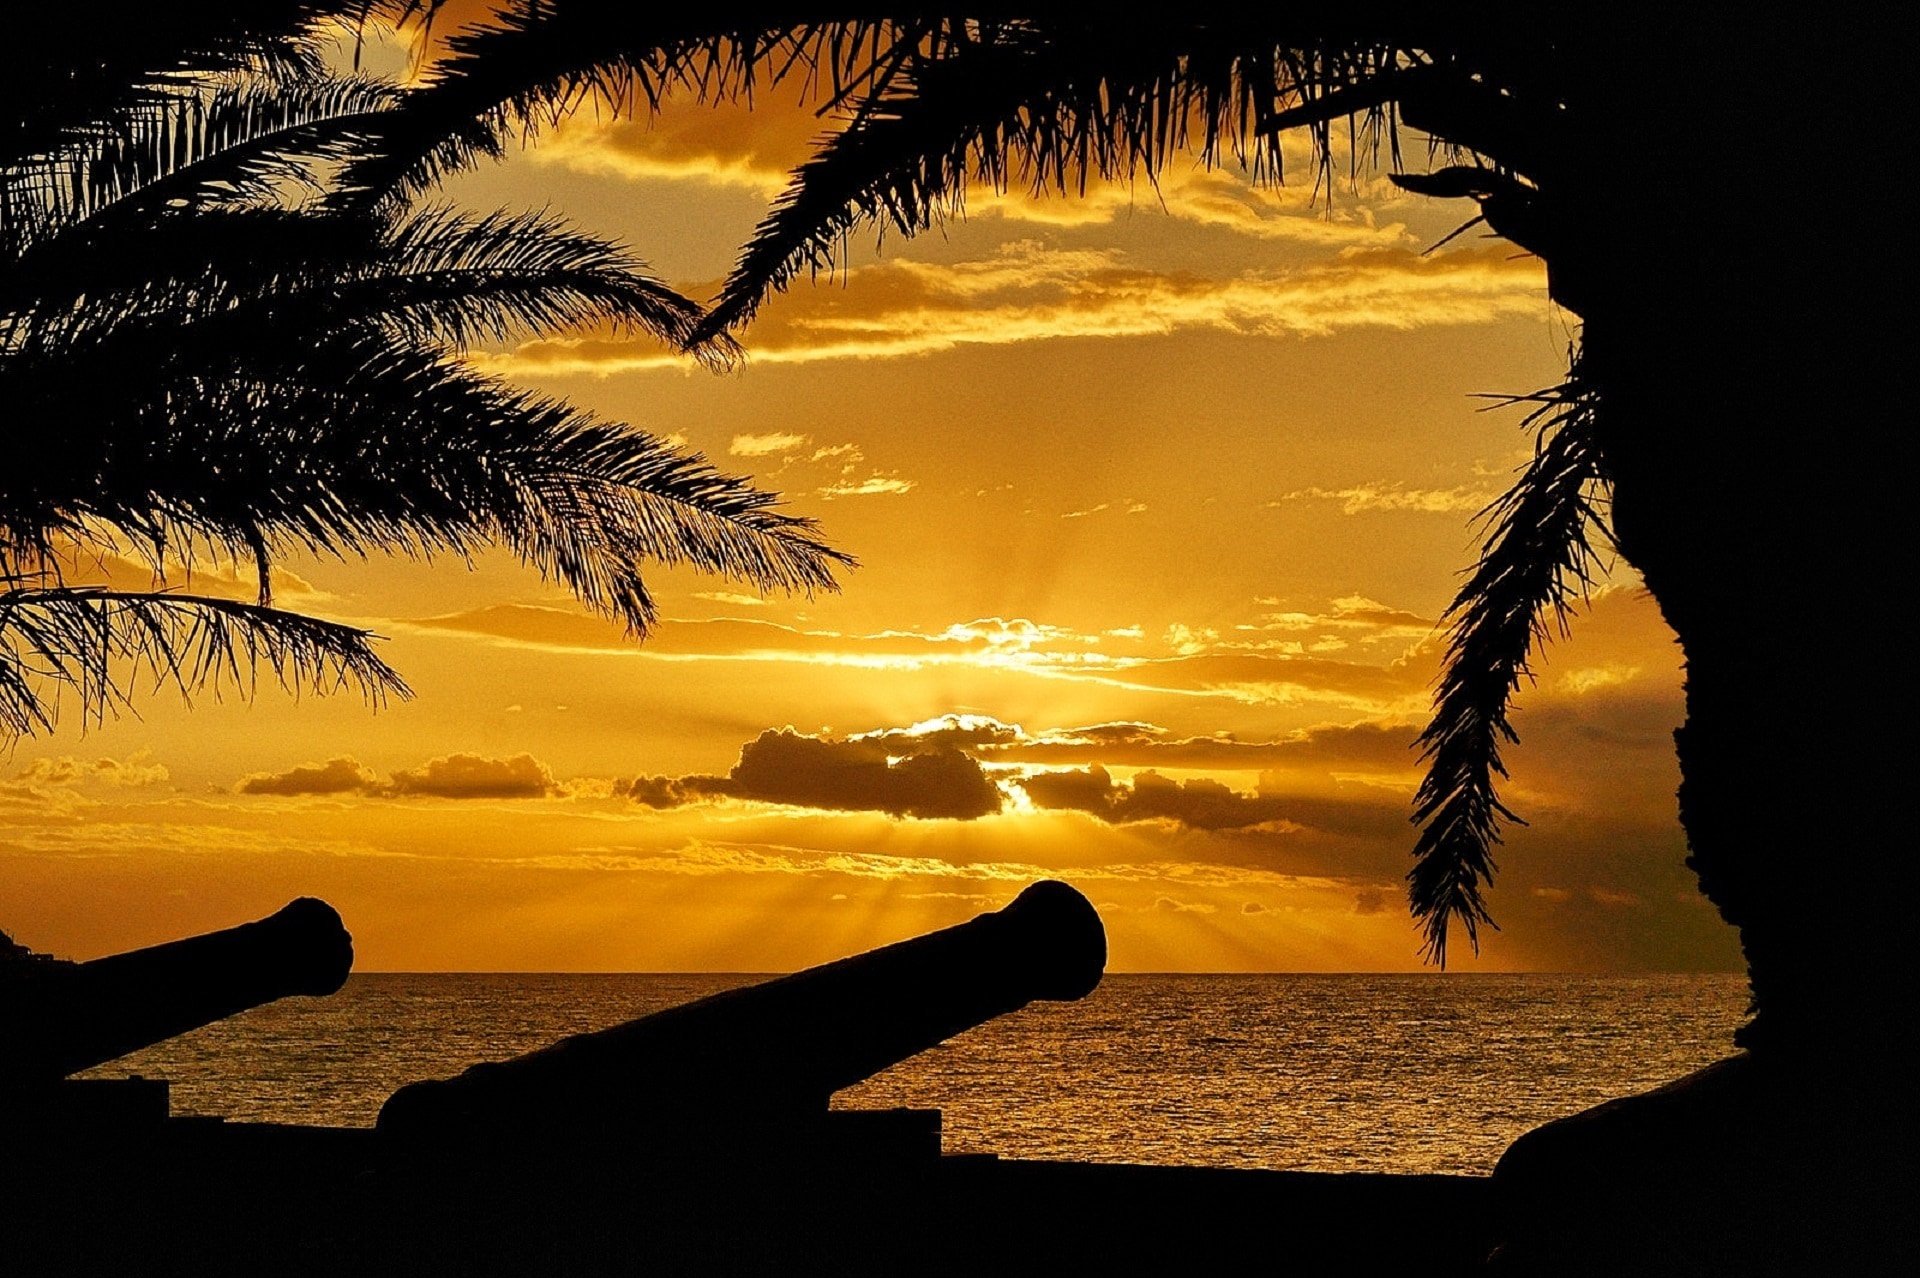 Sunset, Ocean, Cannons, Crepuscular Rays, sunset, silhouette